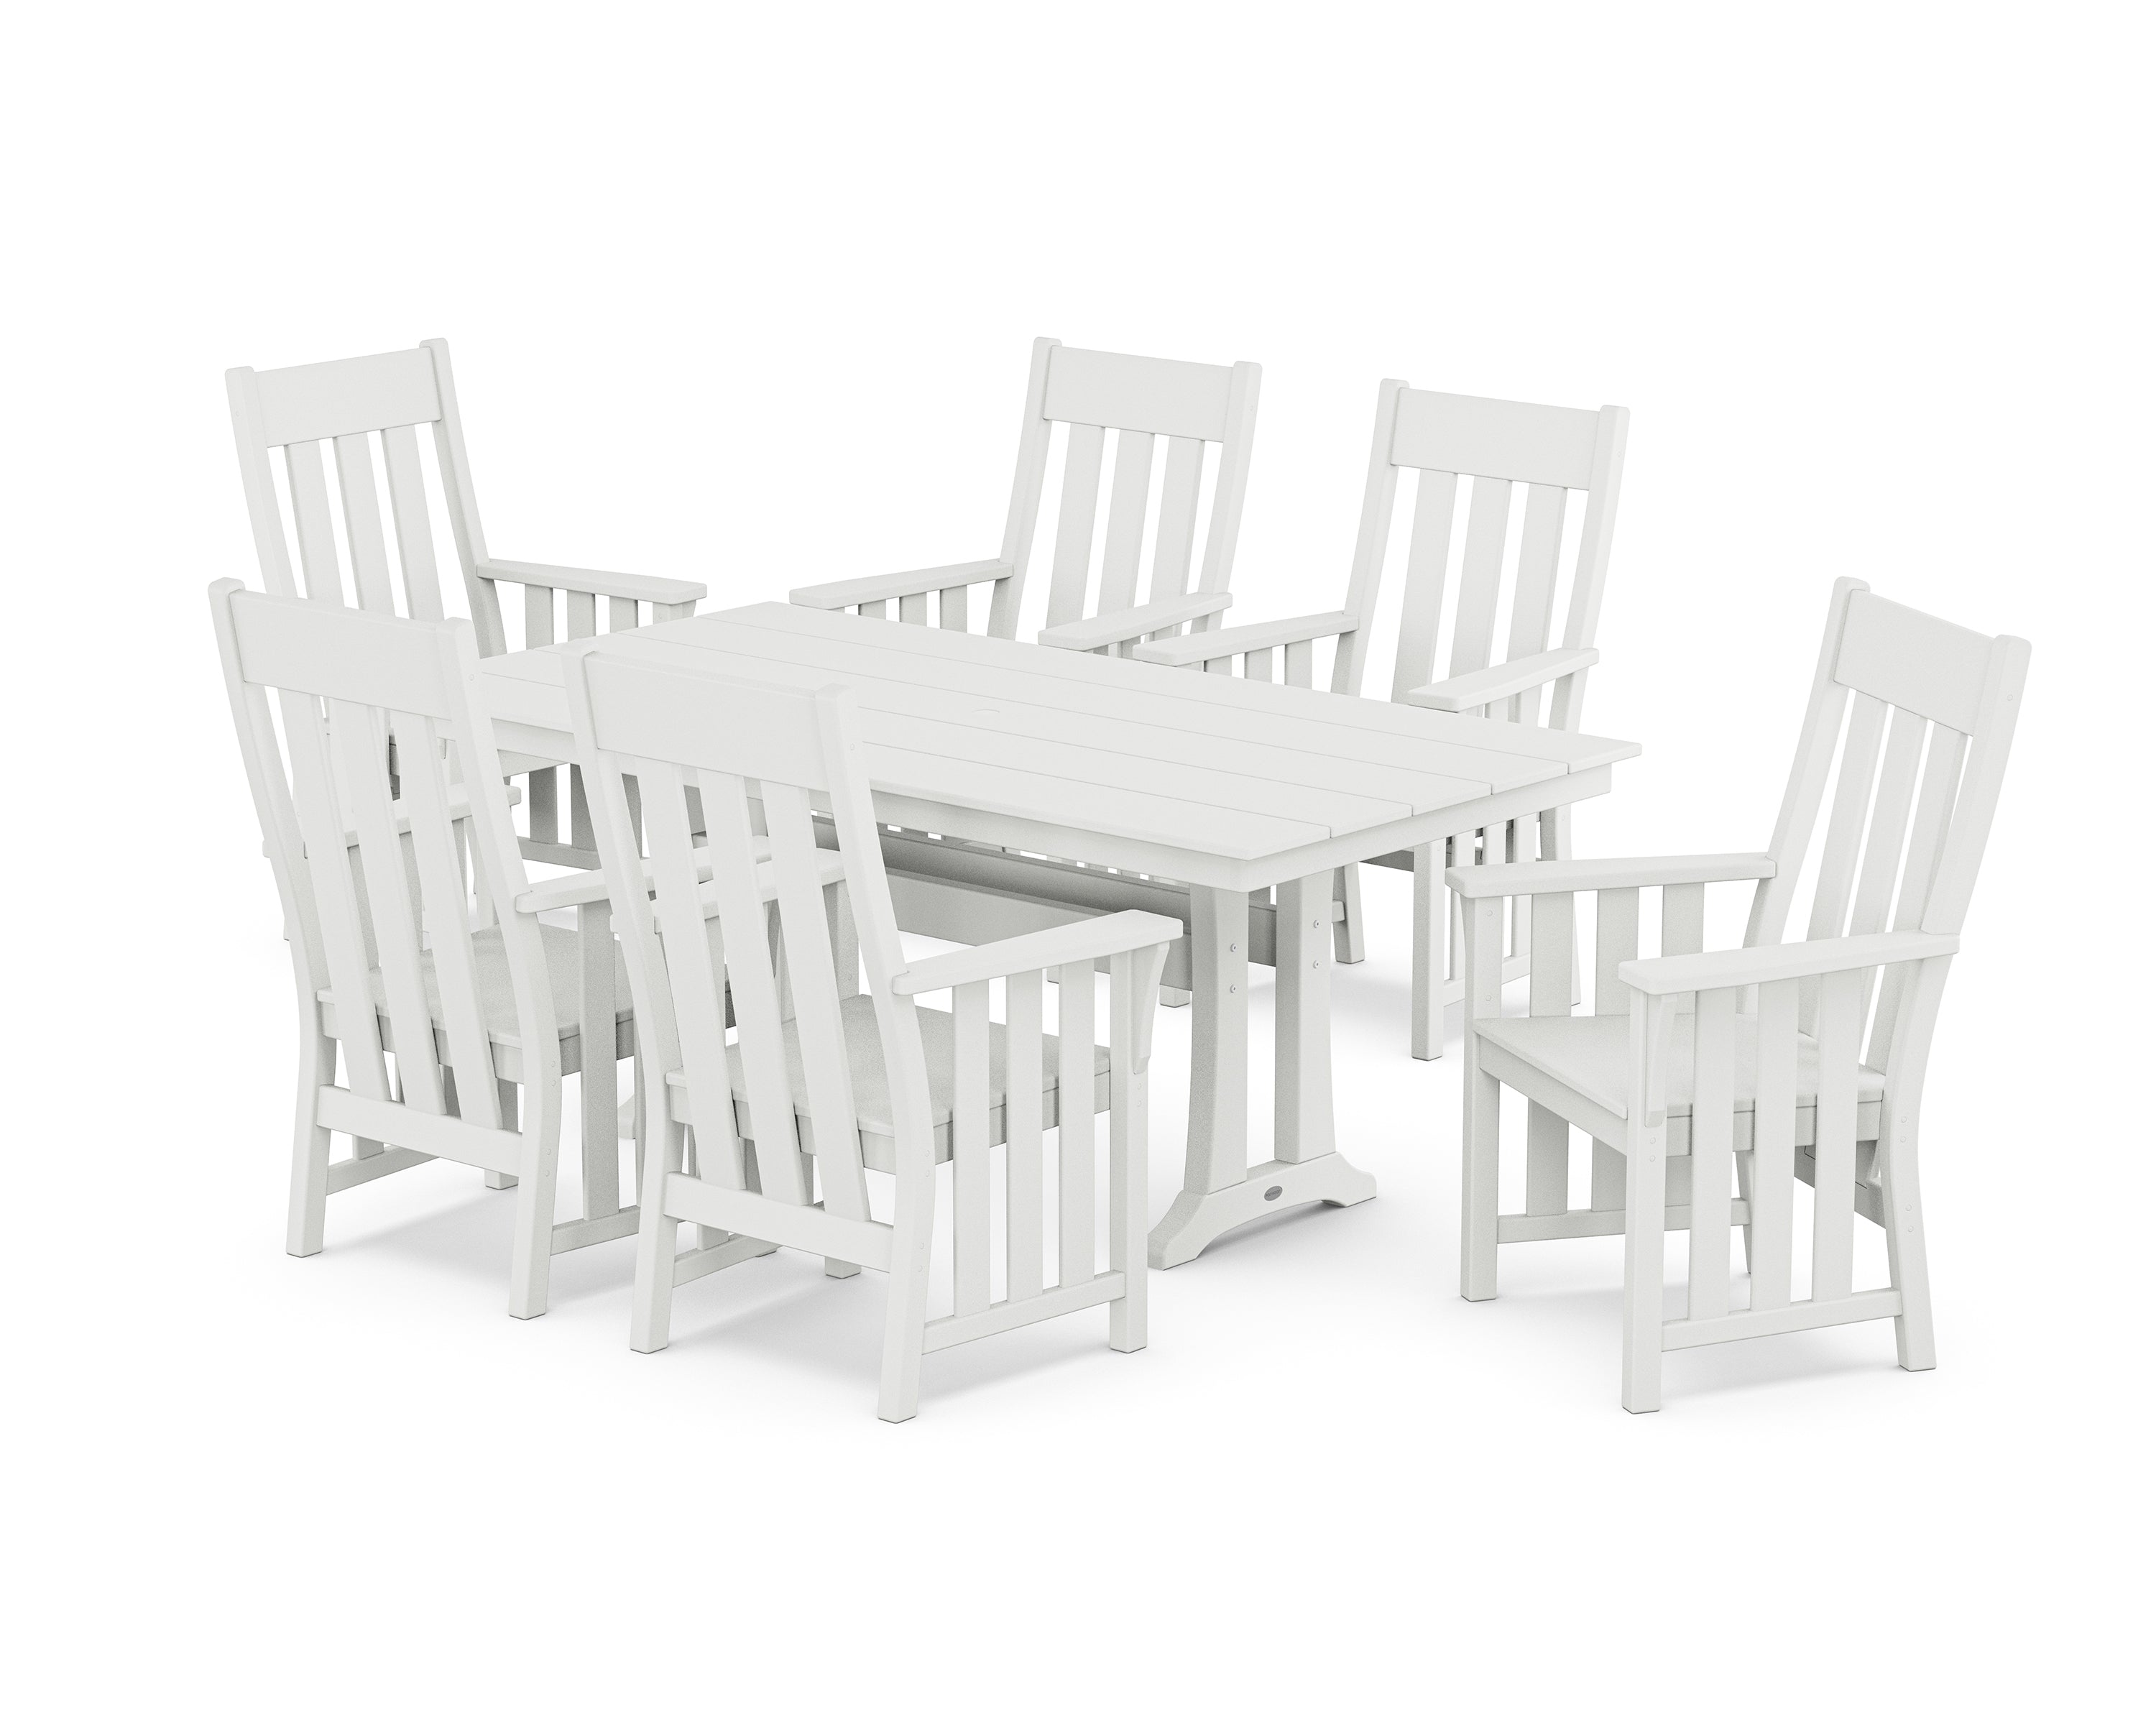 Martha Stewart by POLYWOOD® Acadia Arm Chair 7-Piece Farmhouse Dining Set with Trestle Legs in White